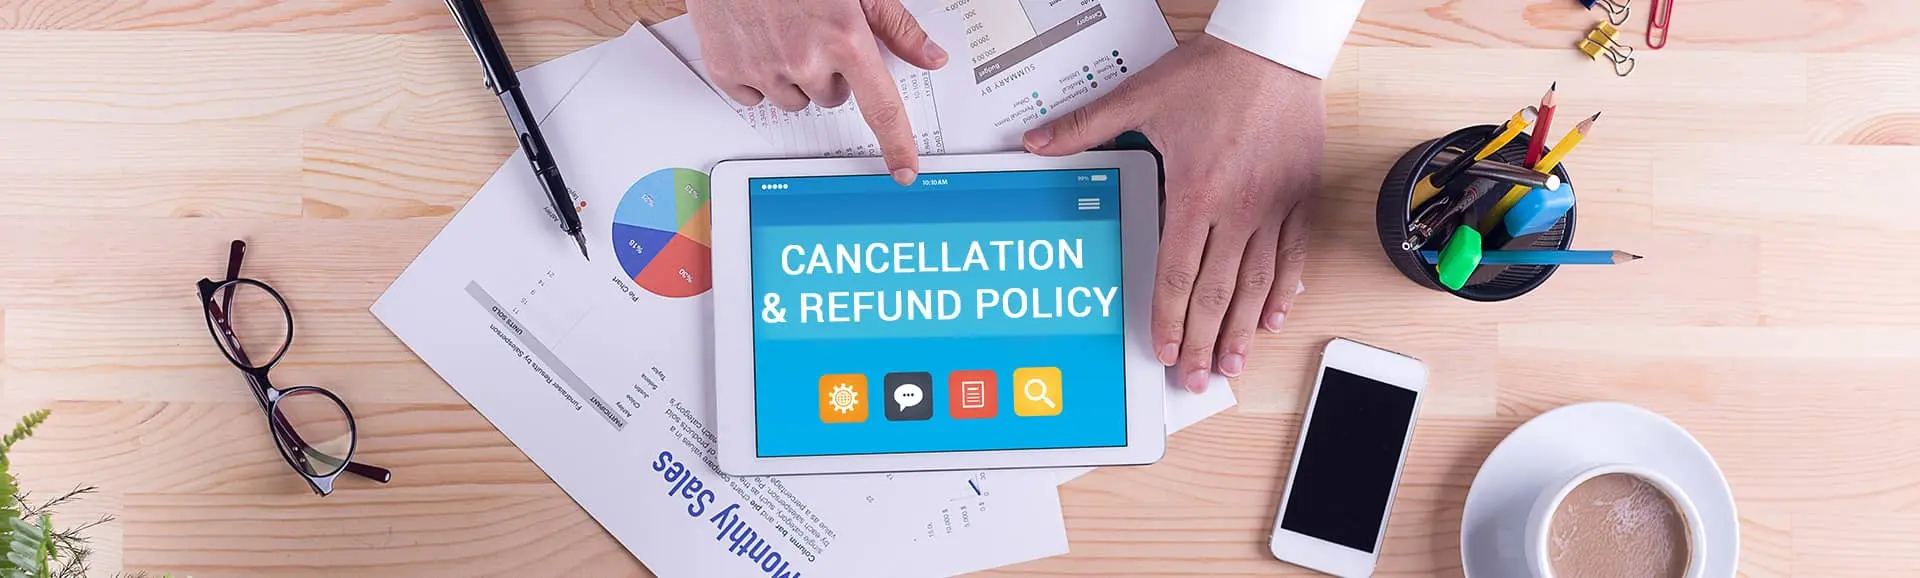 Refund and Return Policy